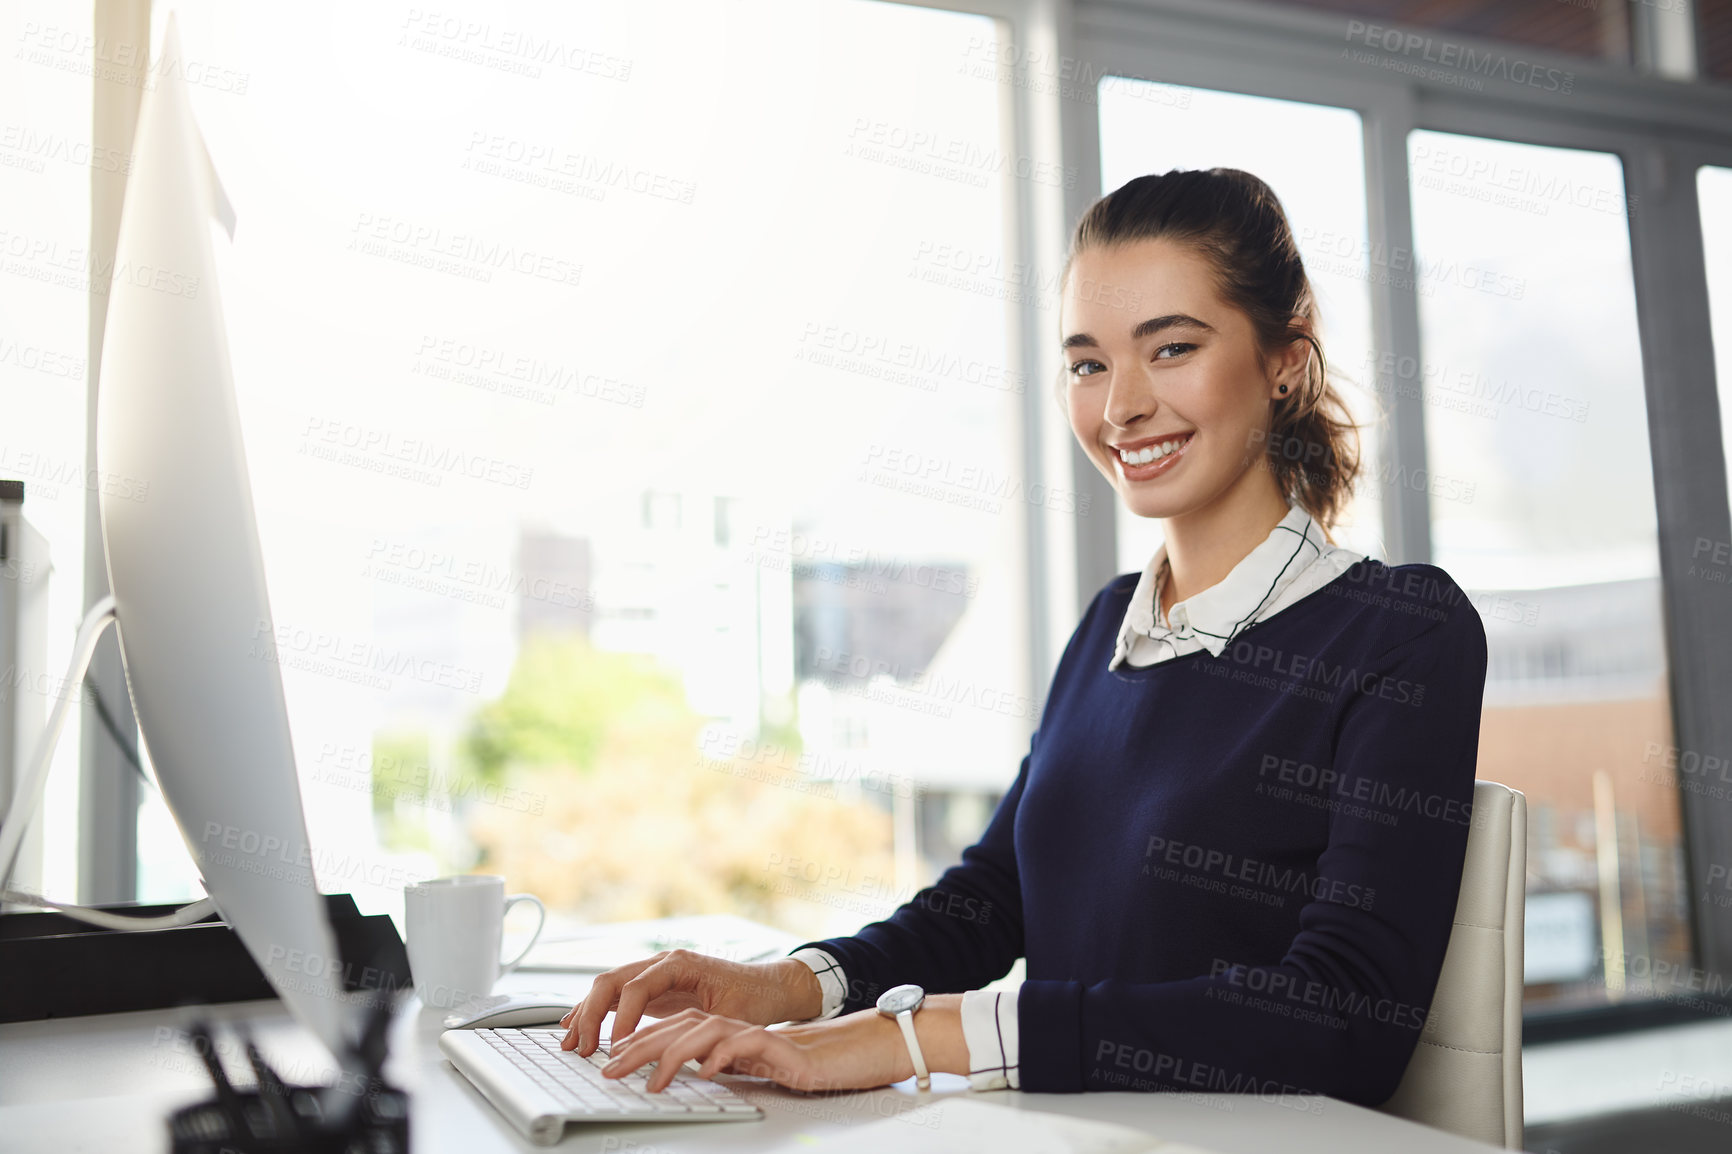 Buy stock photo Portrait of an attractive young businesswoman sitting at her desk and using her computer in a modern office